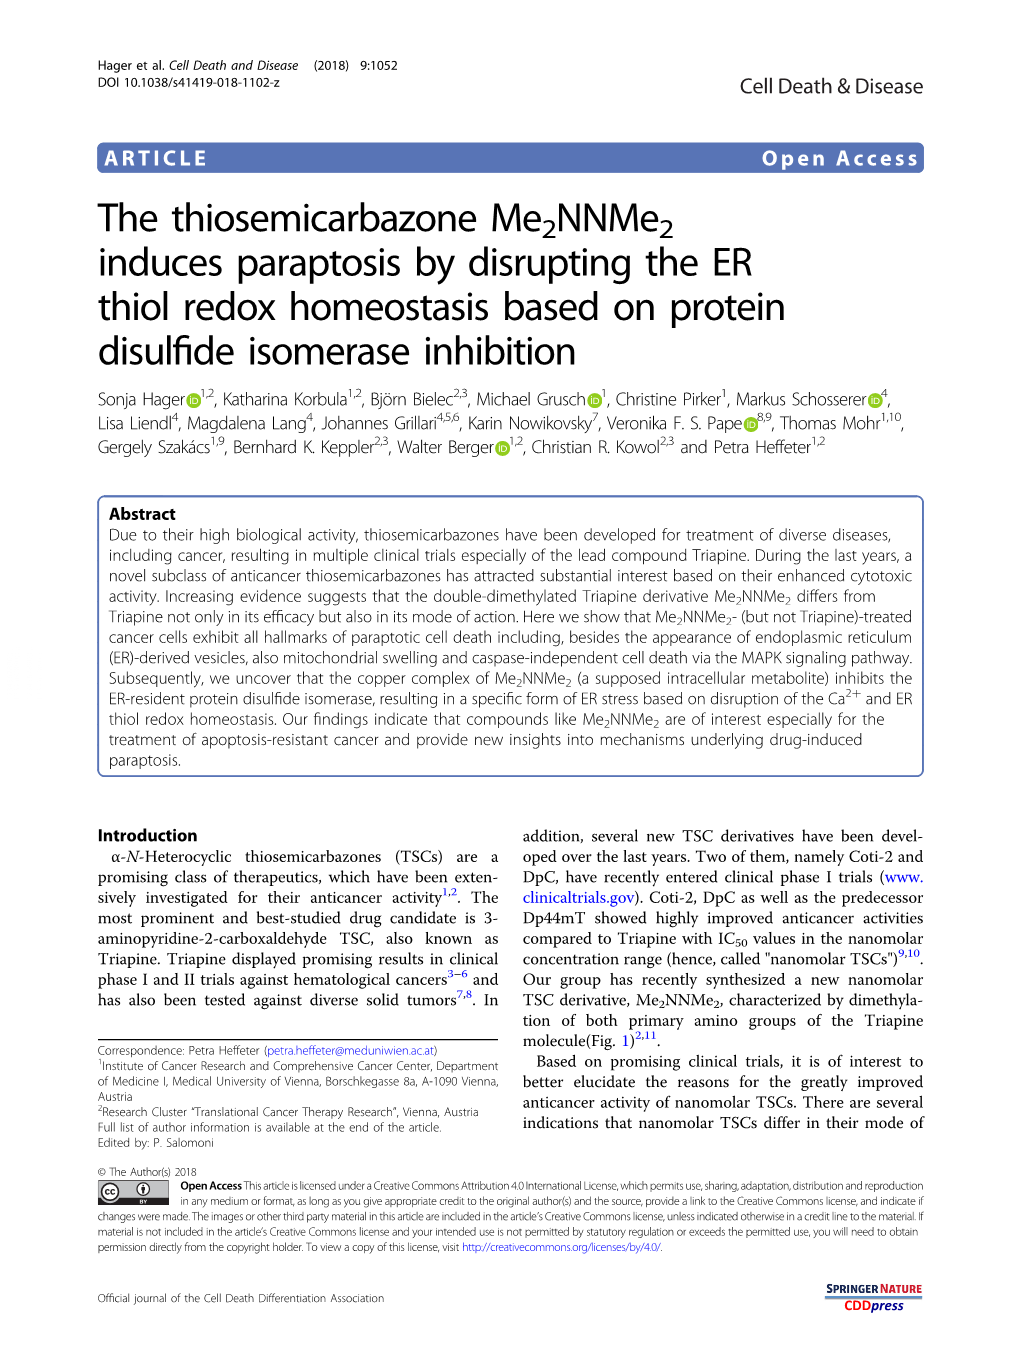 The Thiosemicarbazone Me2nnme2 Induces Paraptosis by Disrupting